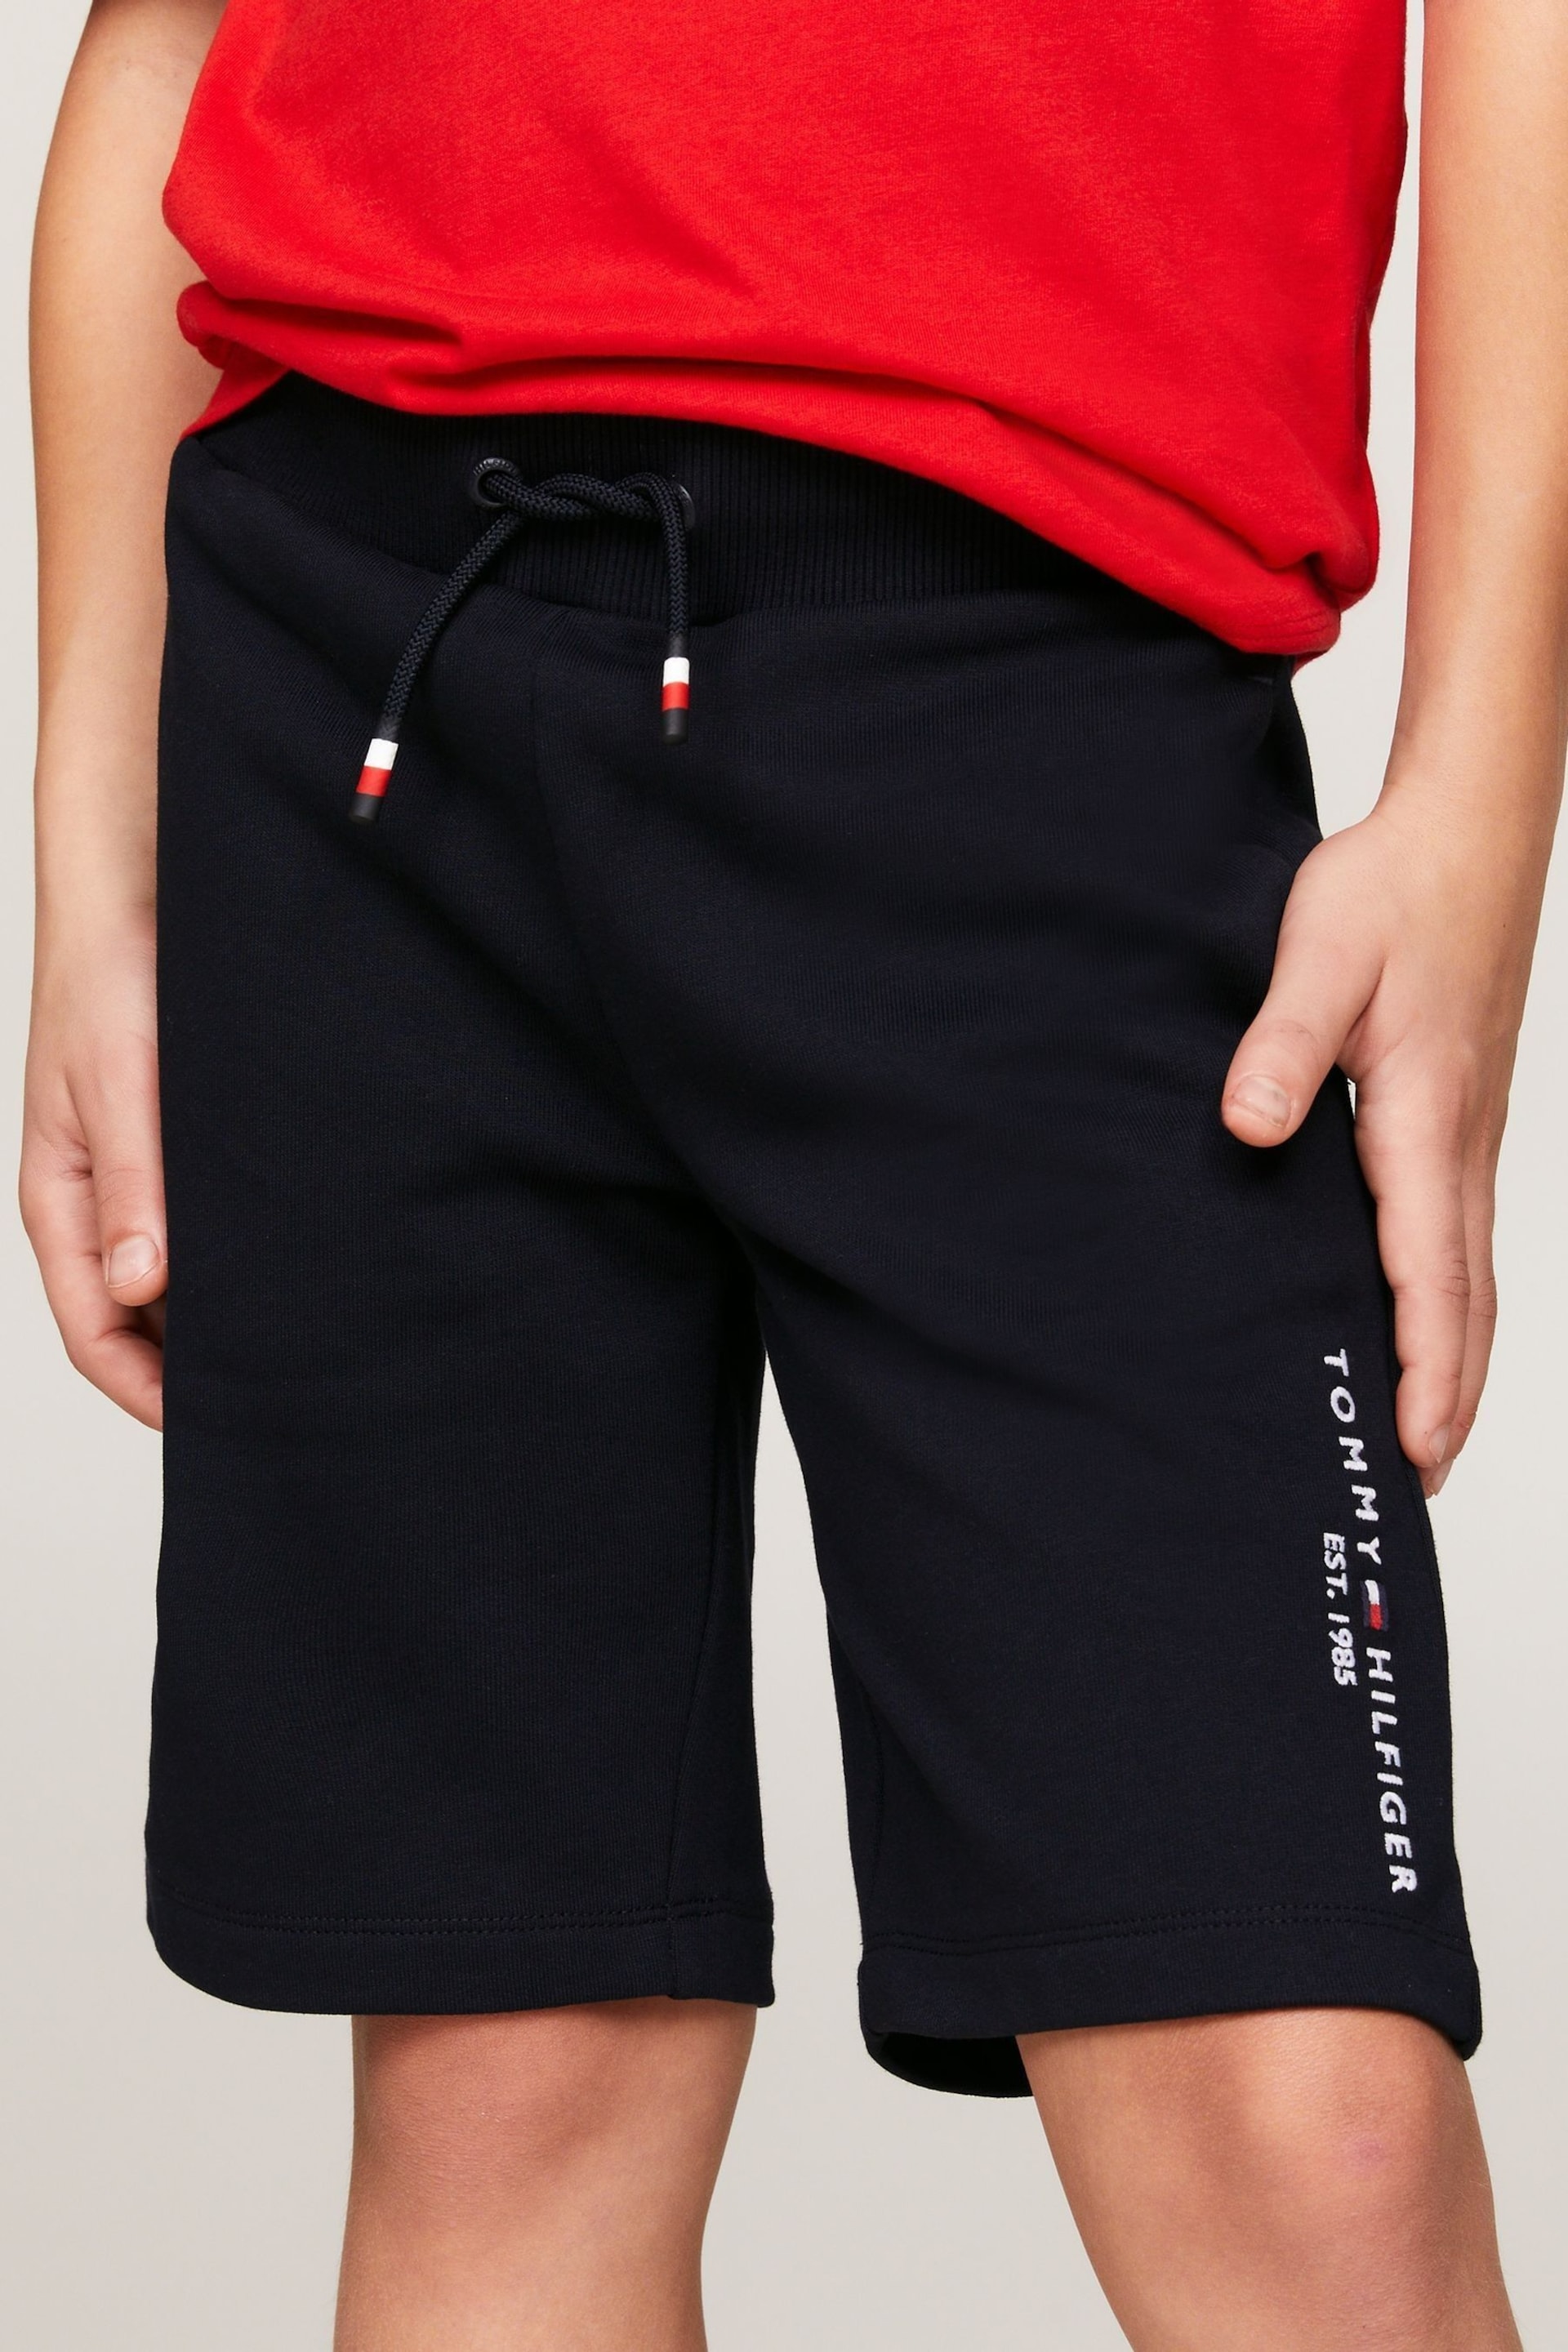 Tommy Hilfiger Blue Essential Sweat Shorts - Image 1 of 5